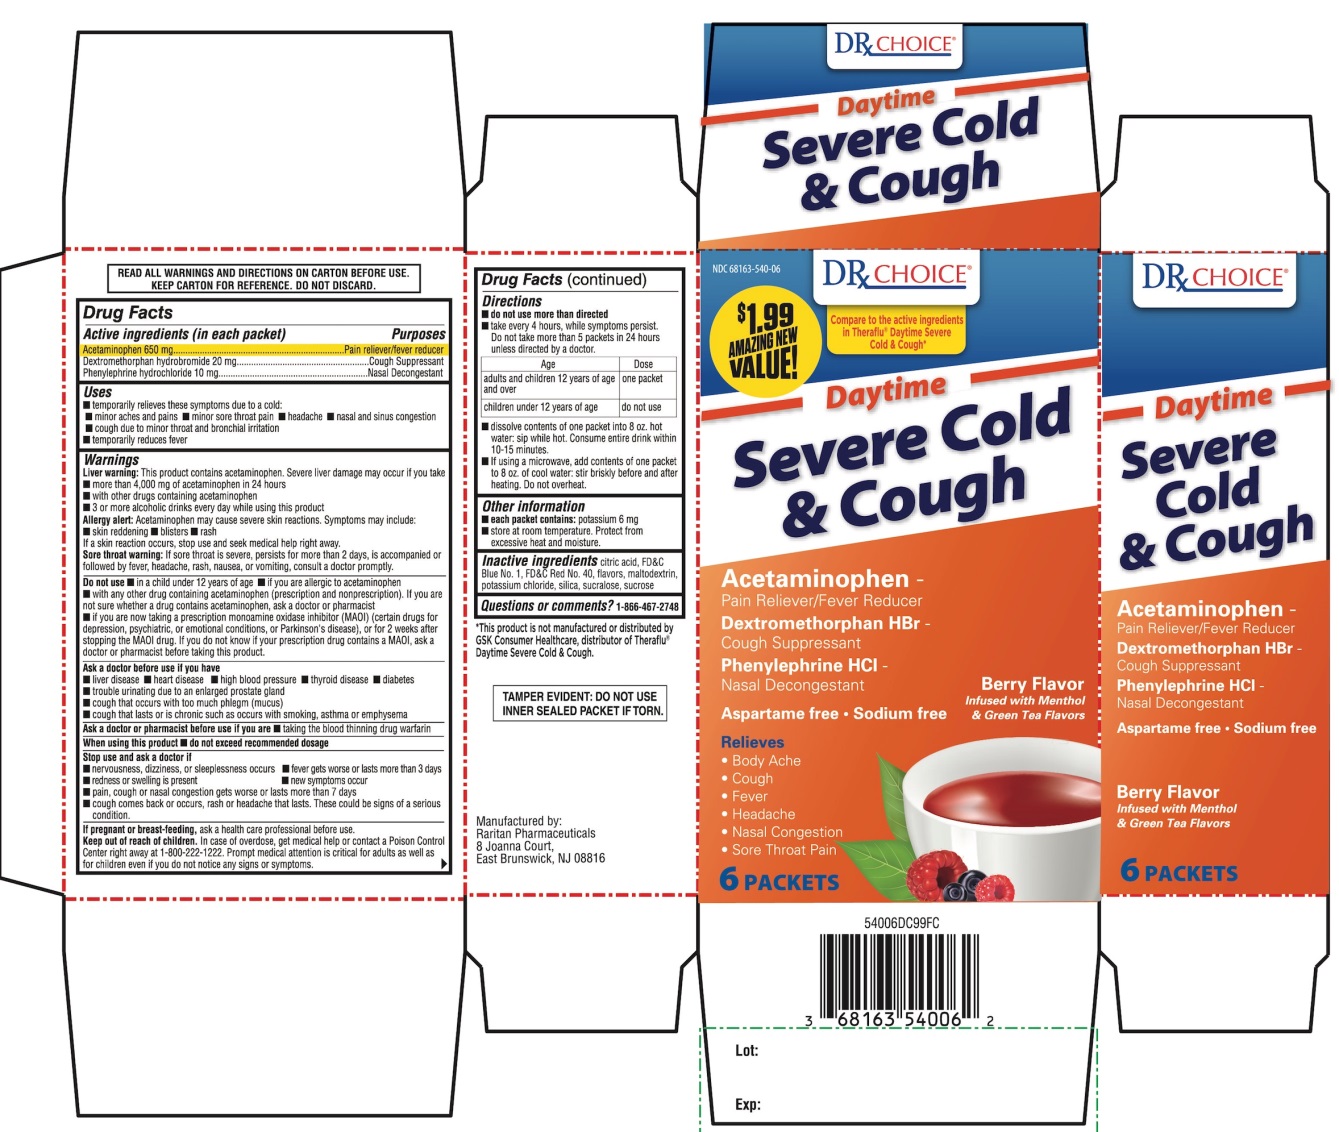 DRx Choice Severe Cold & Cough Berry Flavor